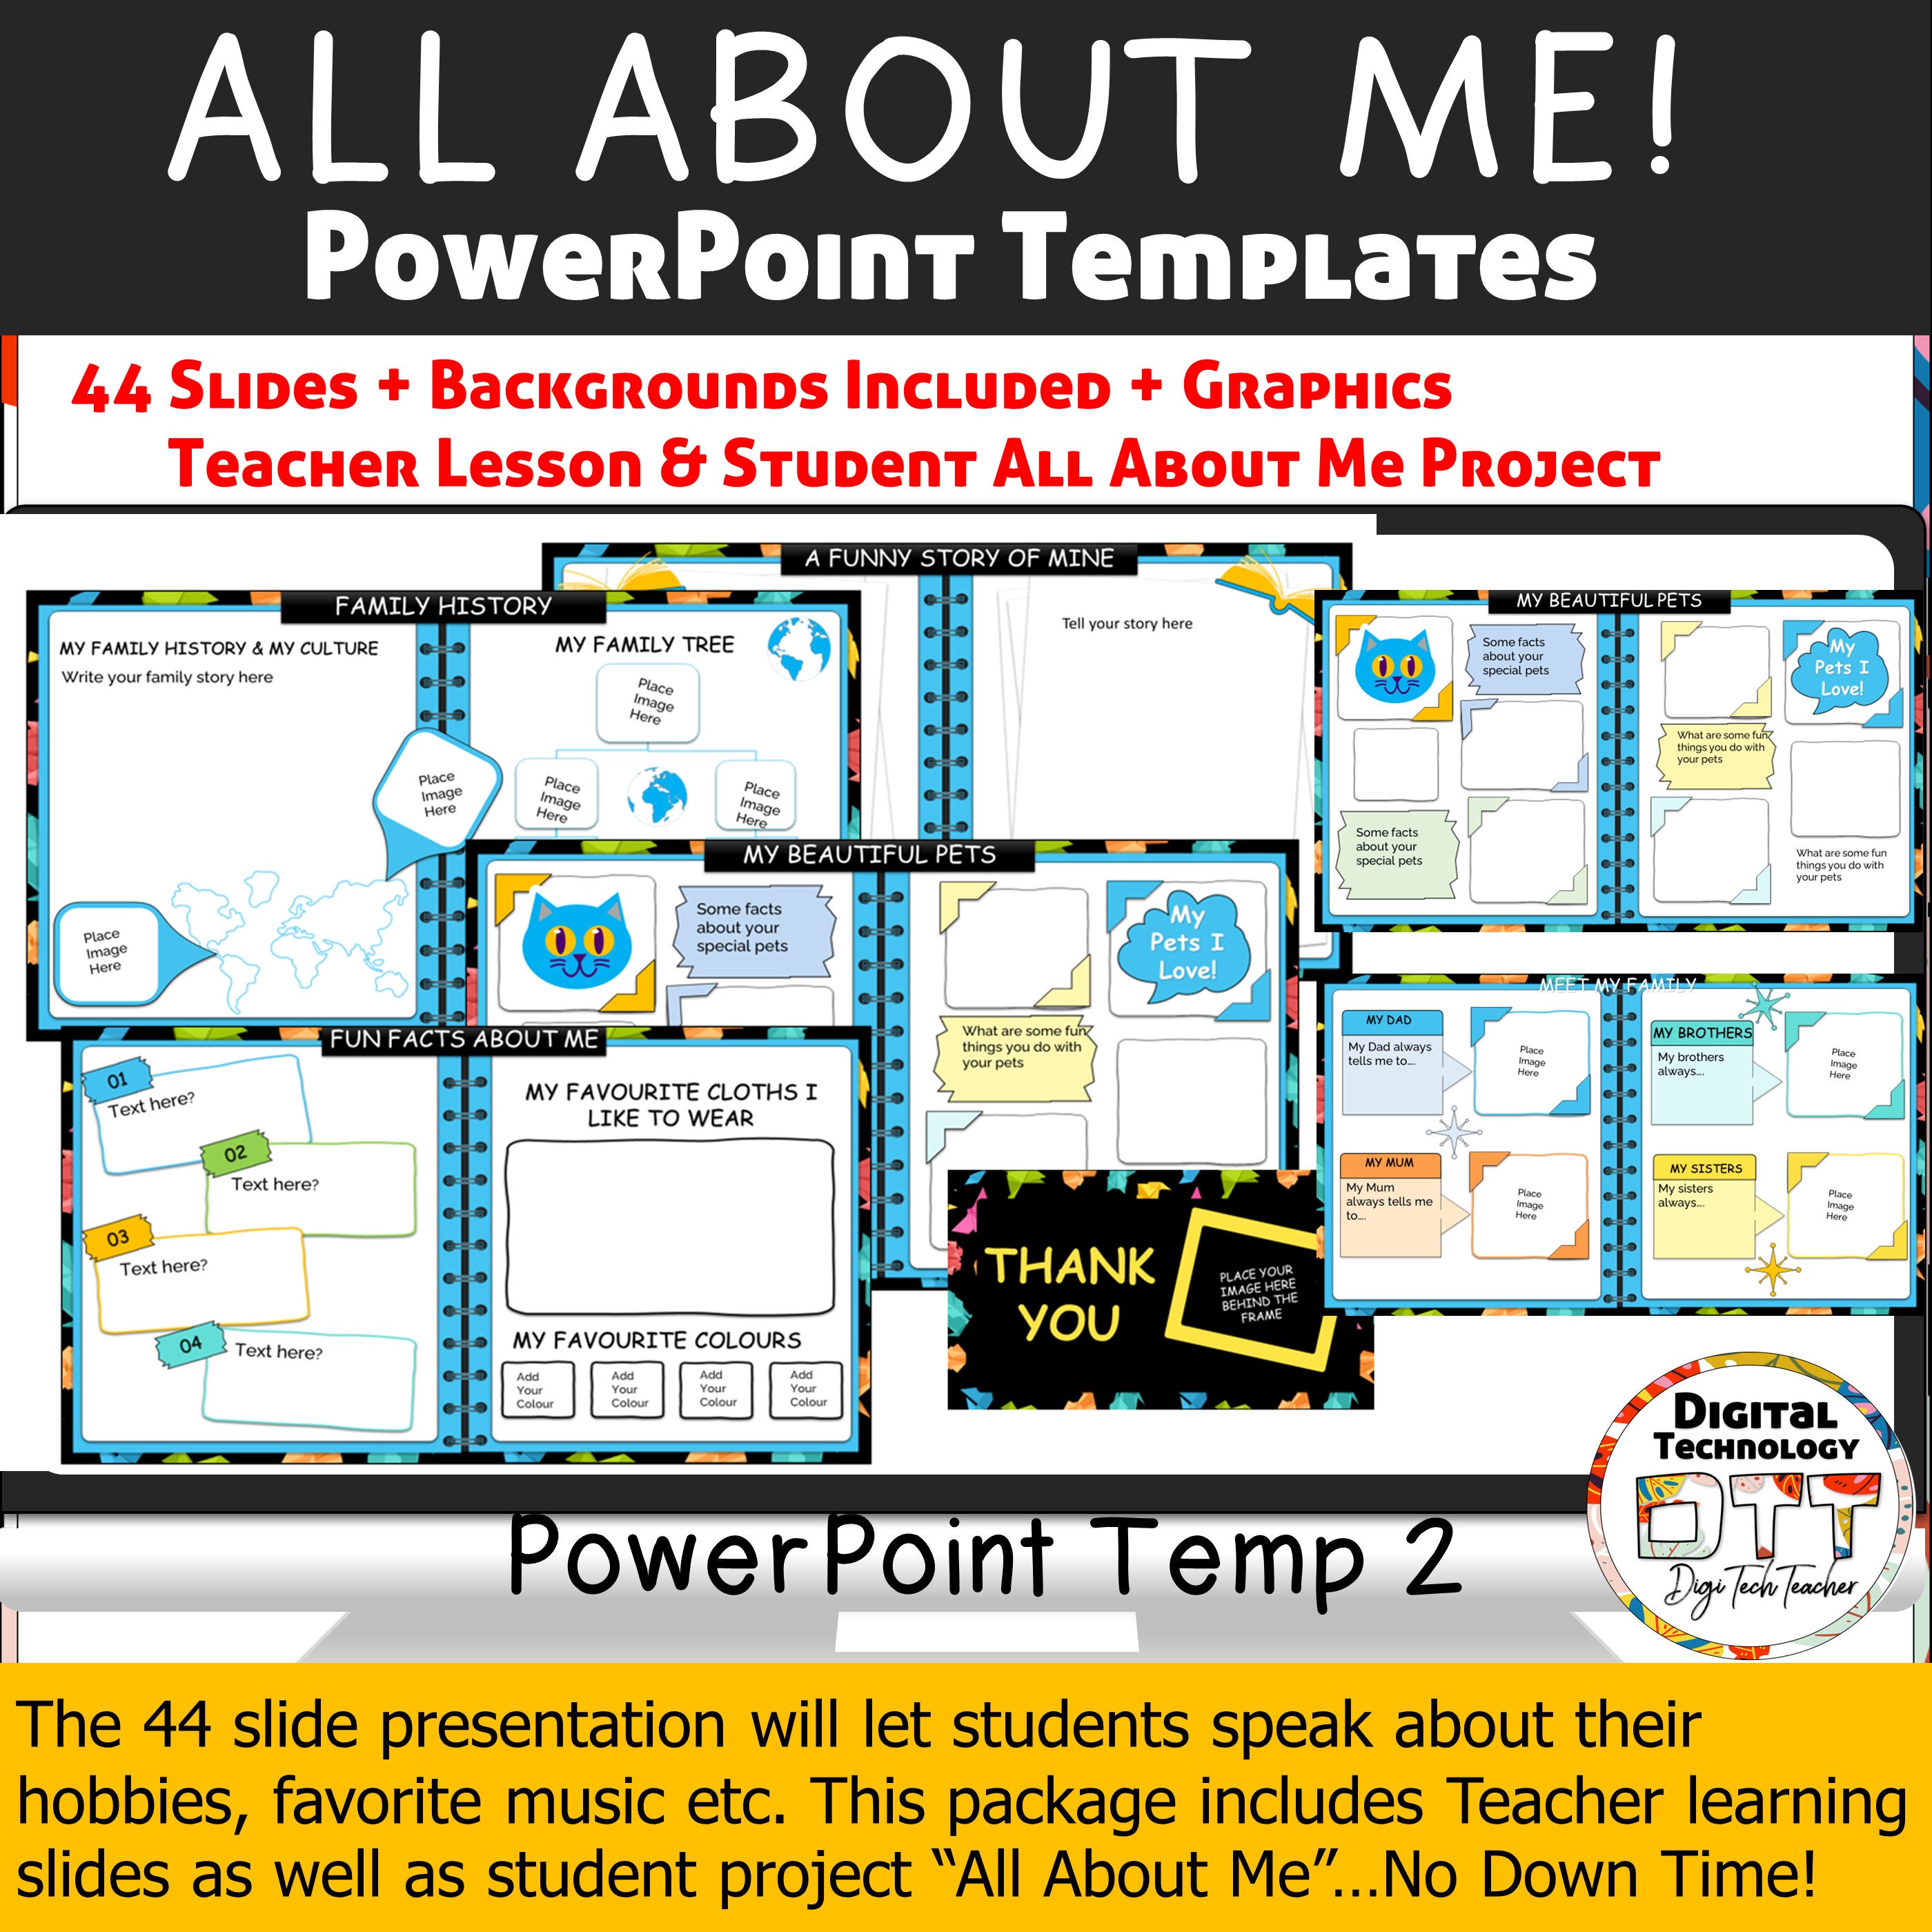 All About Me Powerpoint Template 2, Editable, Back to School, Teacher Get  to Know, All About Me Lesson, School Memories, About Me Journal, 